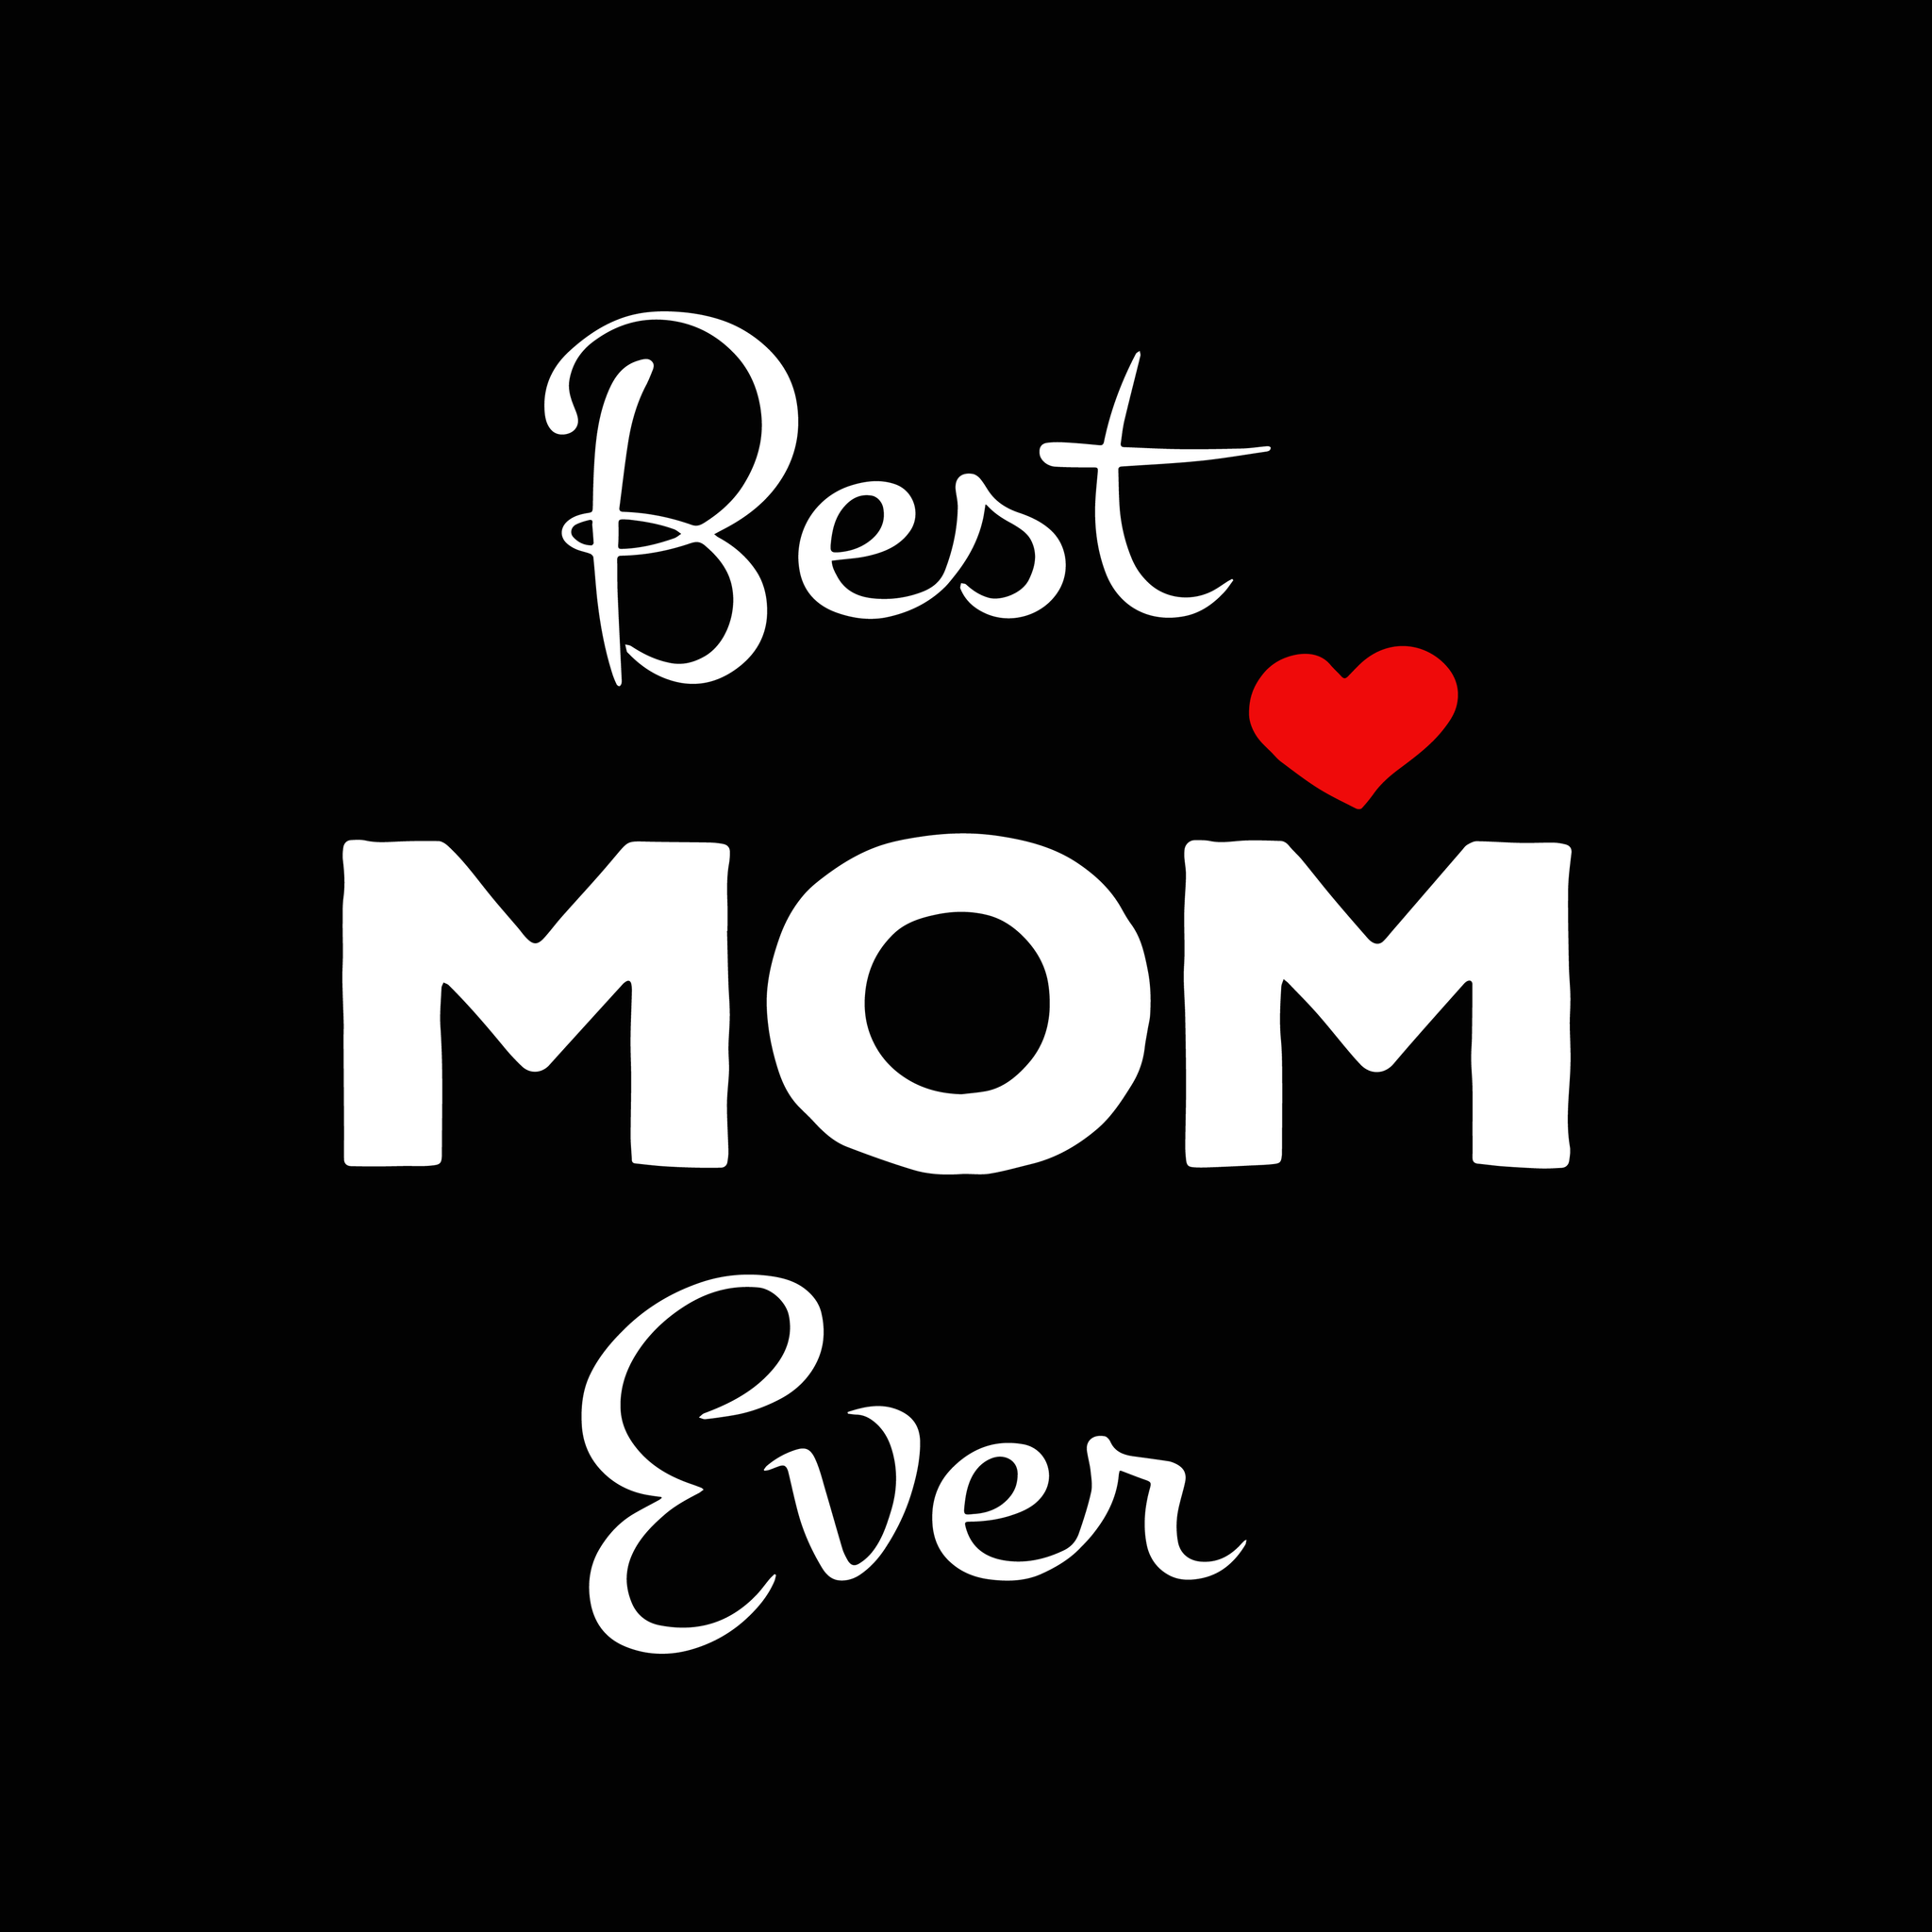 Best mom ever svg, best mom ever, mother 's day svg, mother day, mother svg, mom svg